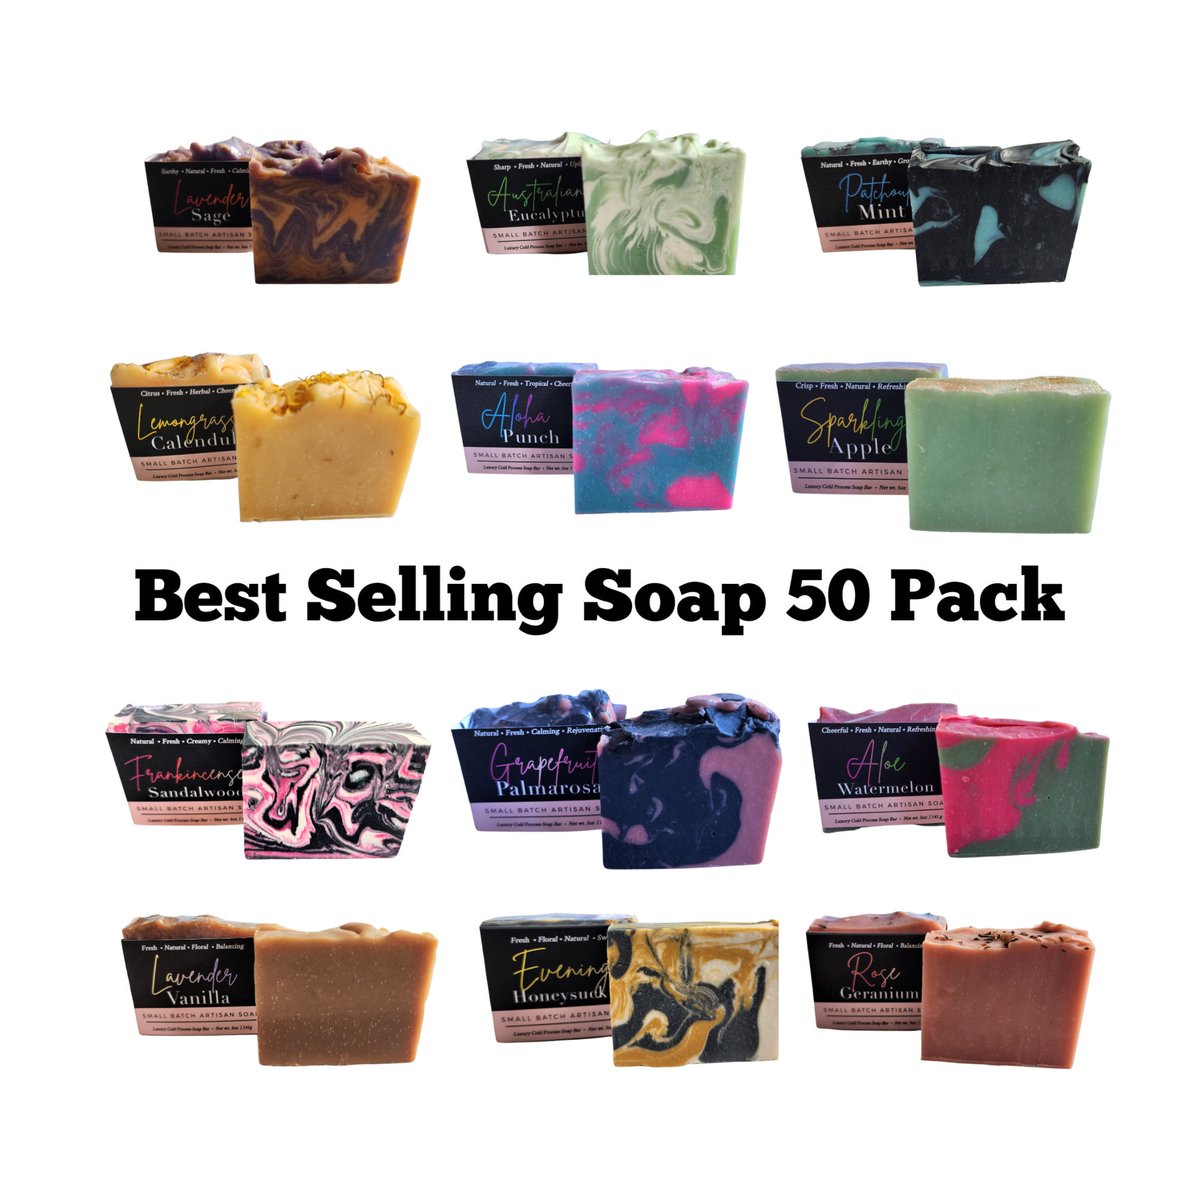 Soap Set Soap Gift 50 pack Best Seller Soap Gifts Soap Christmas Gift Natural Soap Organic Soap Handmade Soap Sale Unique Soap tuppu.net/e22547e3 #Christmasgifts #gifts #selfcare #vegan #Etsy #Soapgift #DeShawnMarie #shopsmall #SoapSale